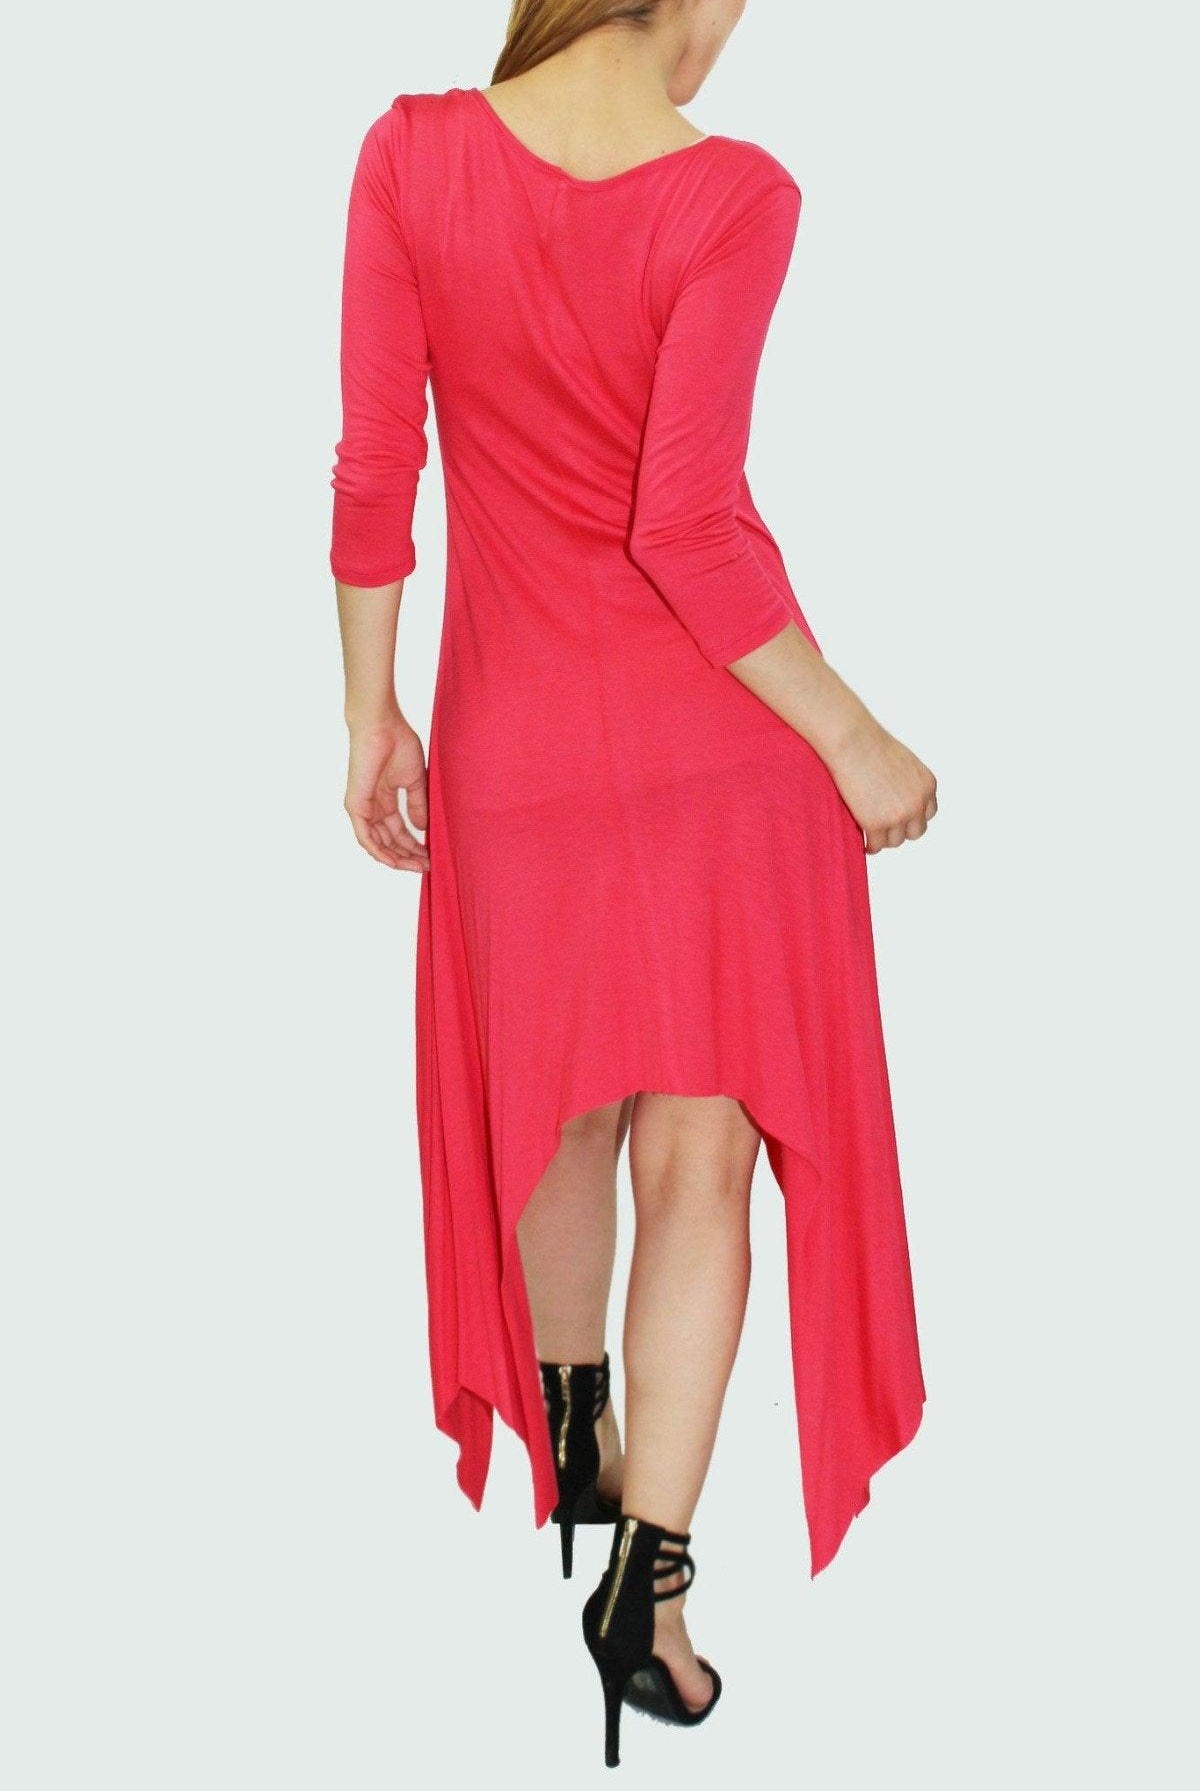 Women's Dresses High Low Side Tail Solid Dress Coral